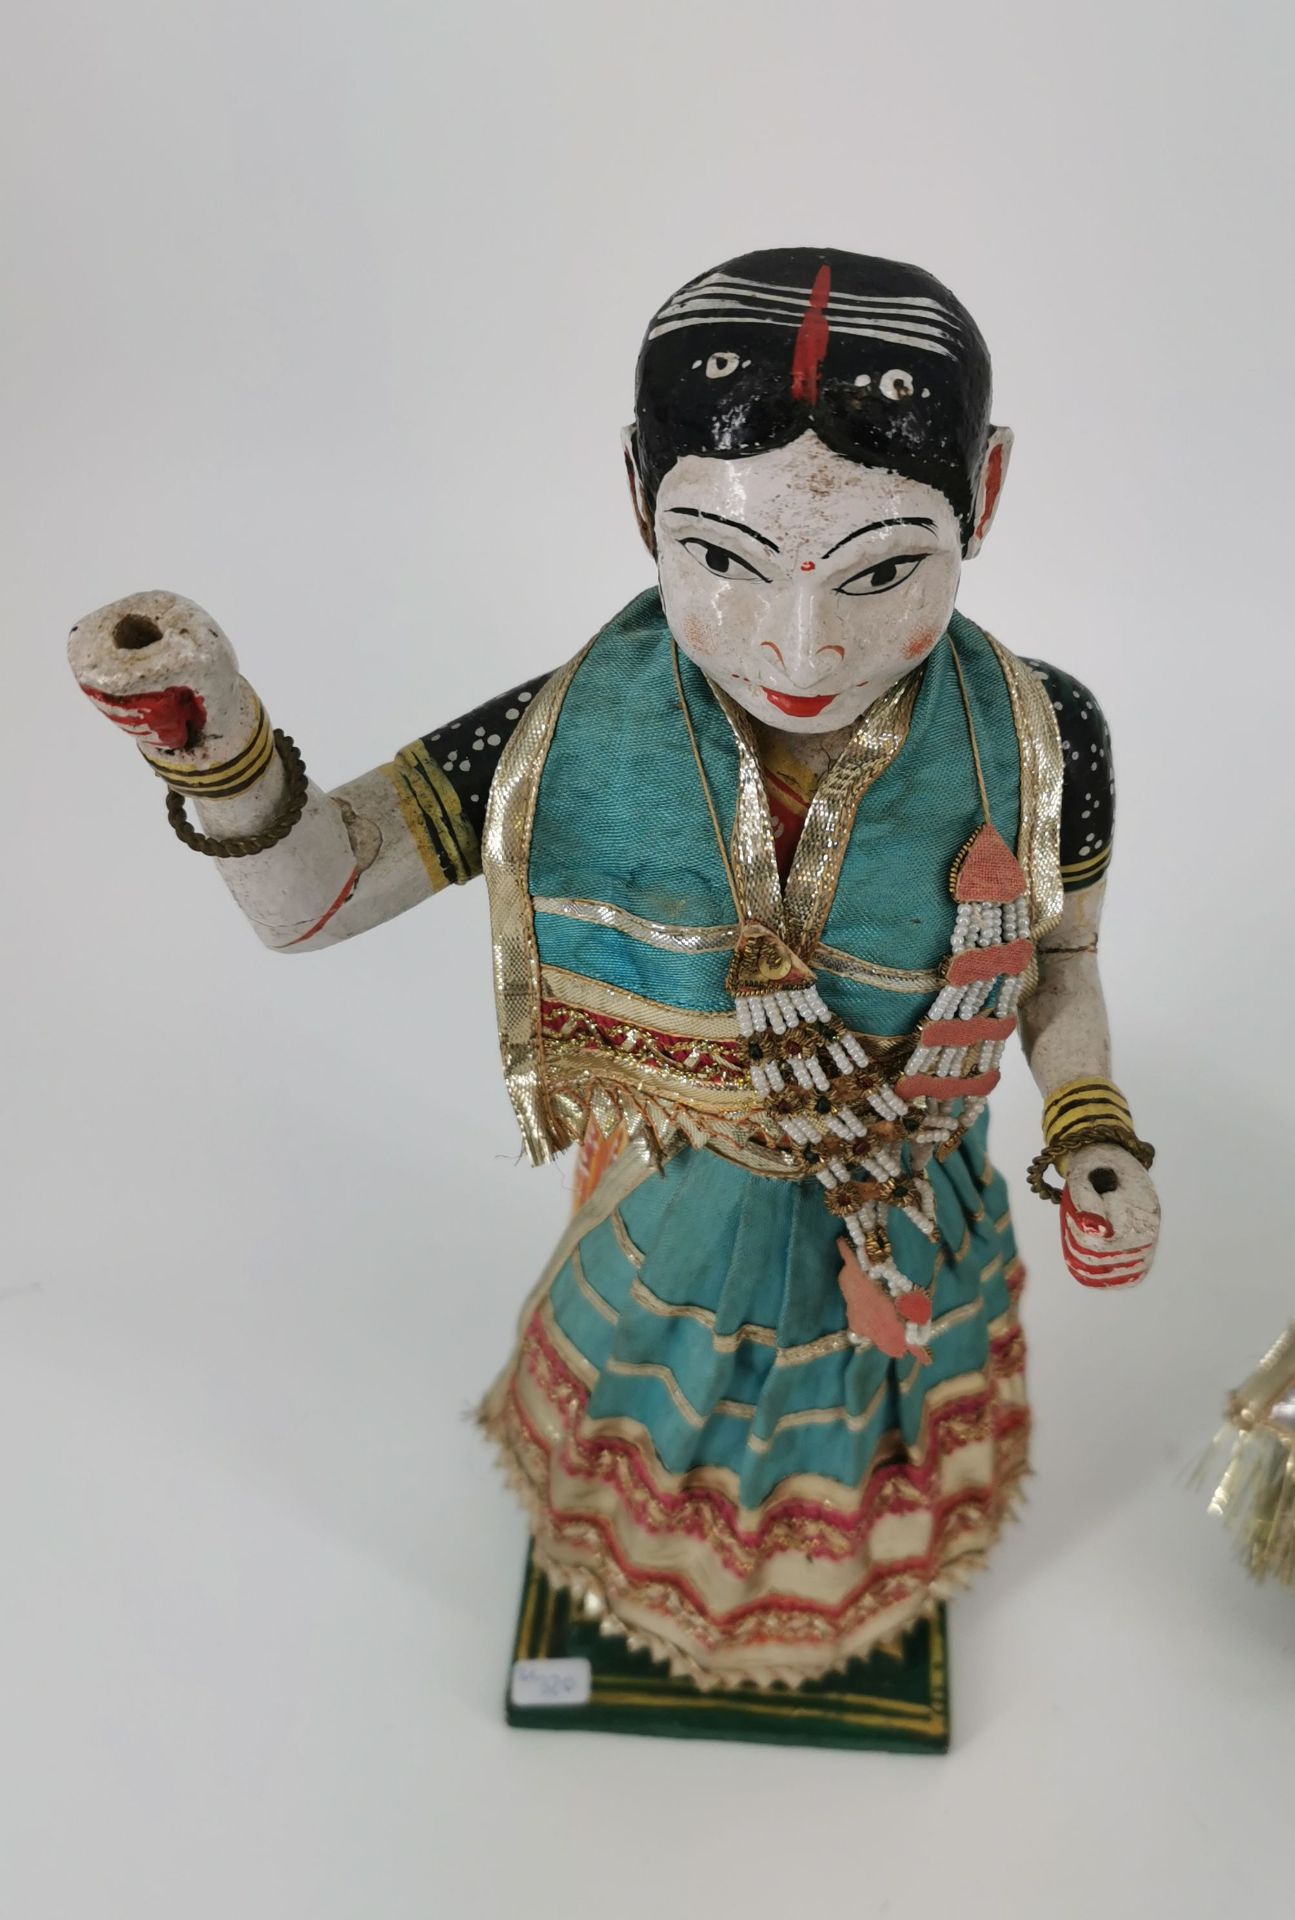 2 INDIAN WOODEN FIGURES - Image 2 of 6